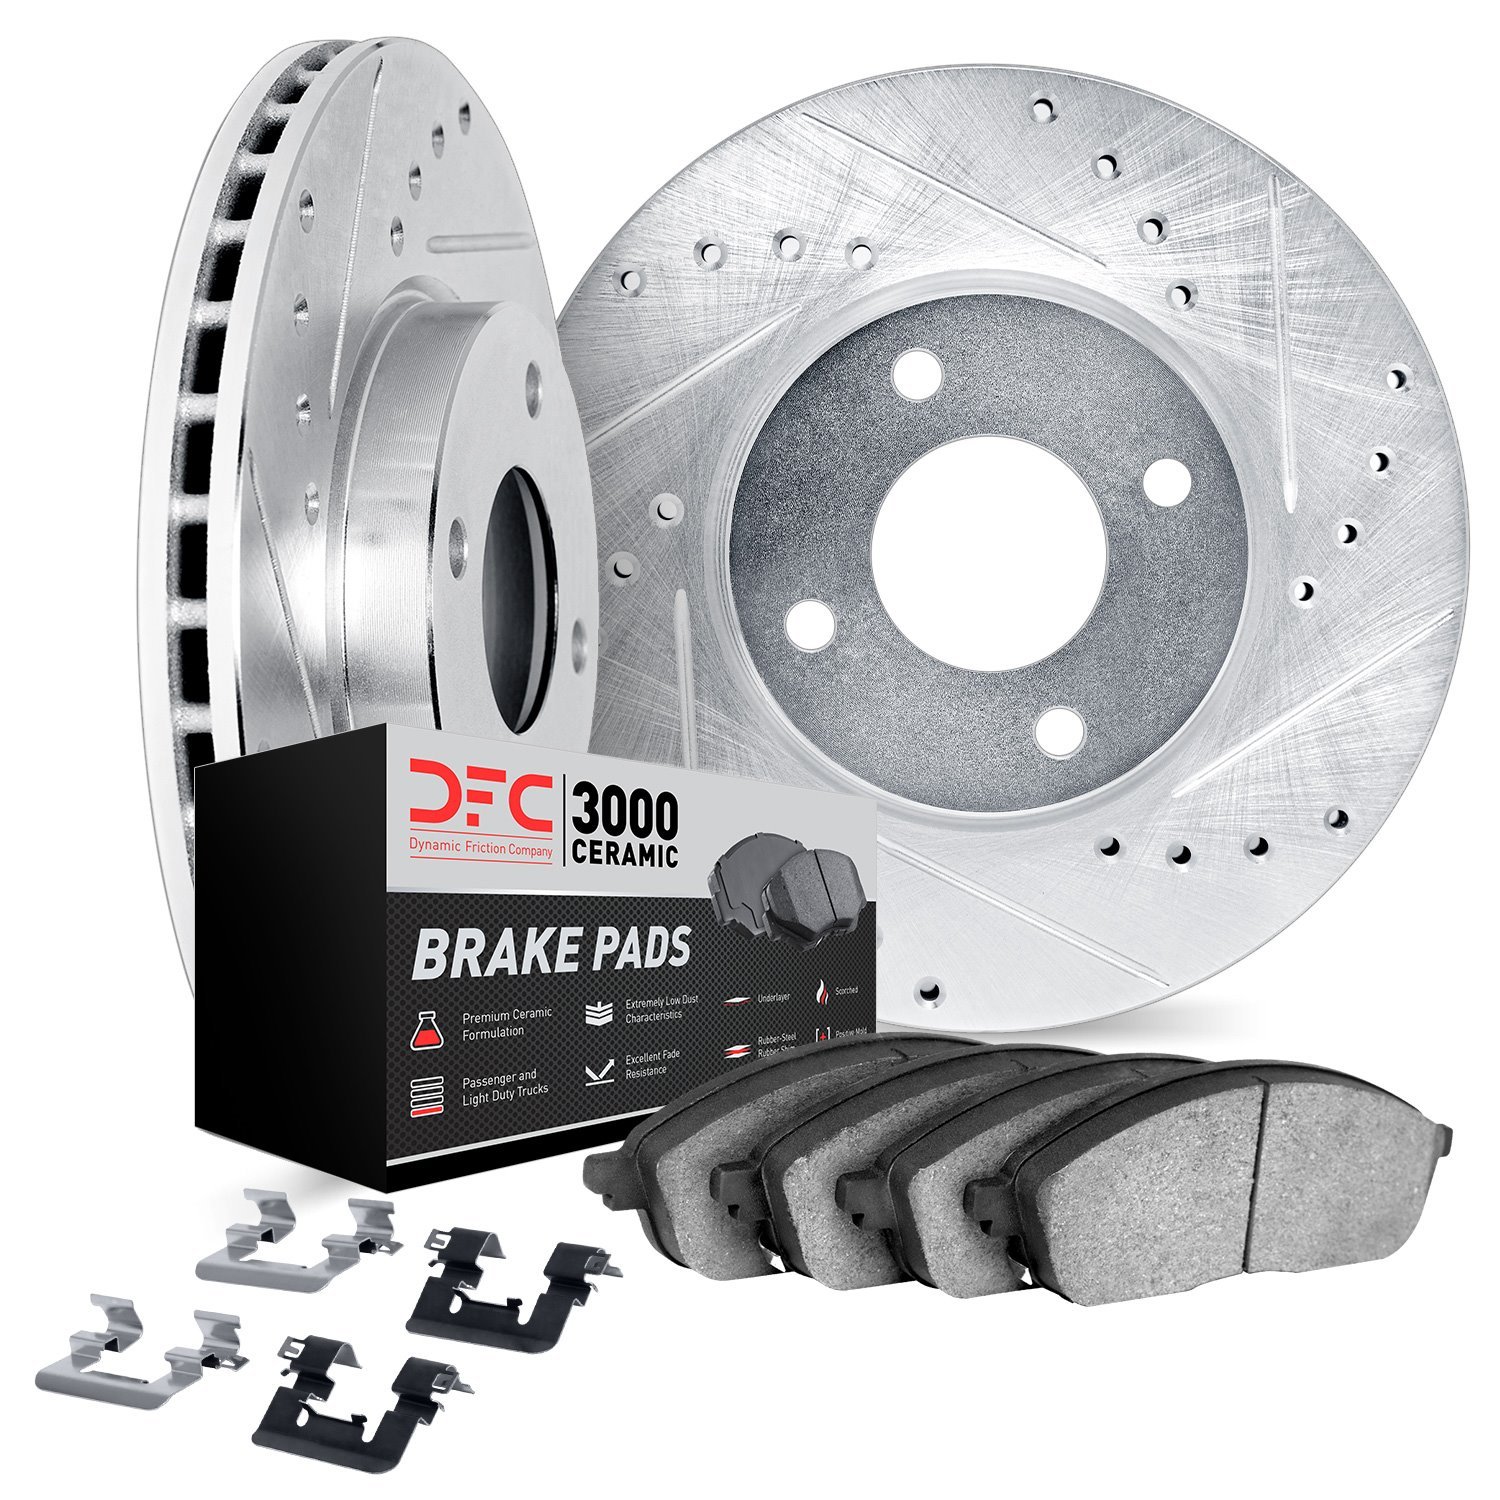 8312-54168 Drilled/Slotted Brake Rotors with 3000-Series Ceramic Brake Pads Kit & Hardware [Black], Fits Select Ford/Lincoln/Mer